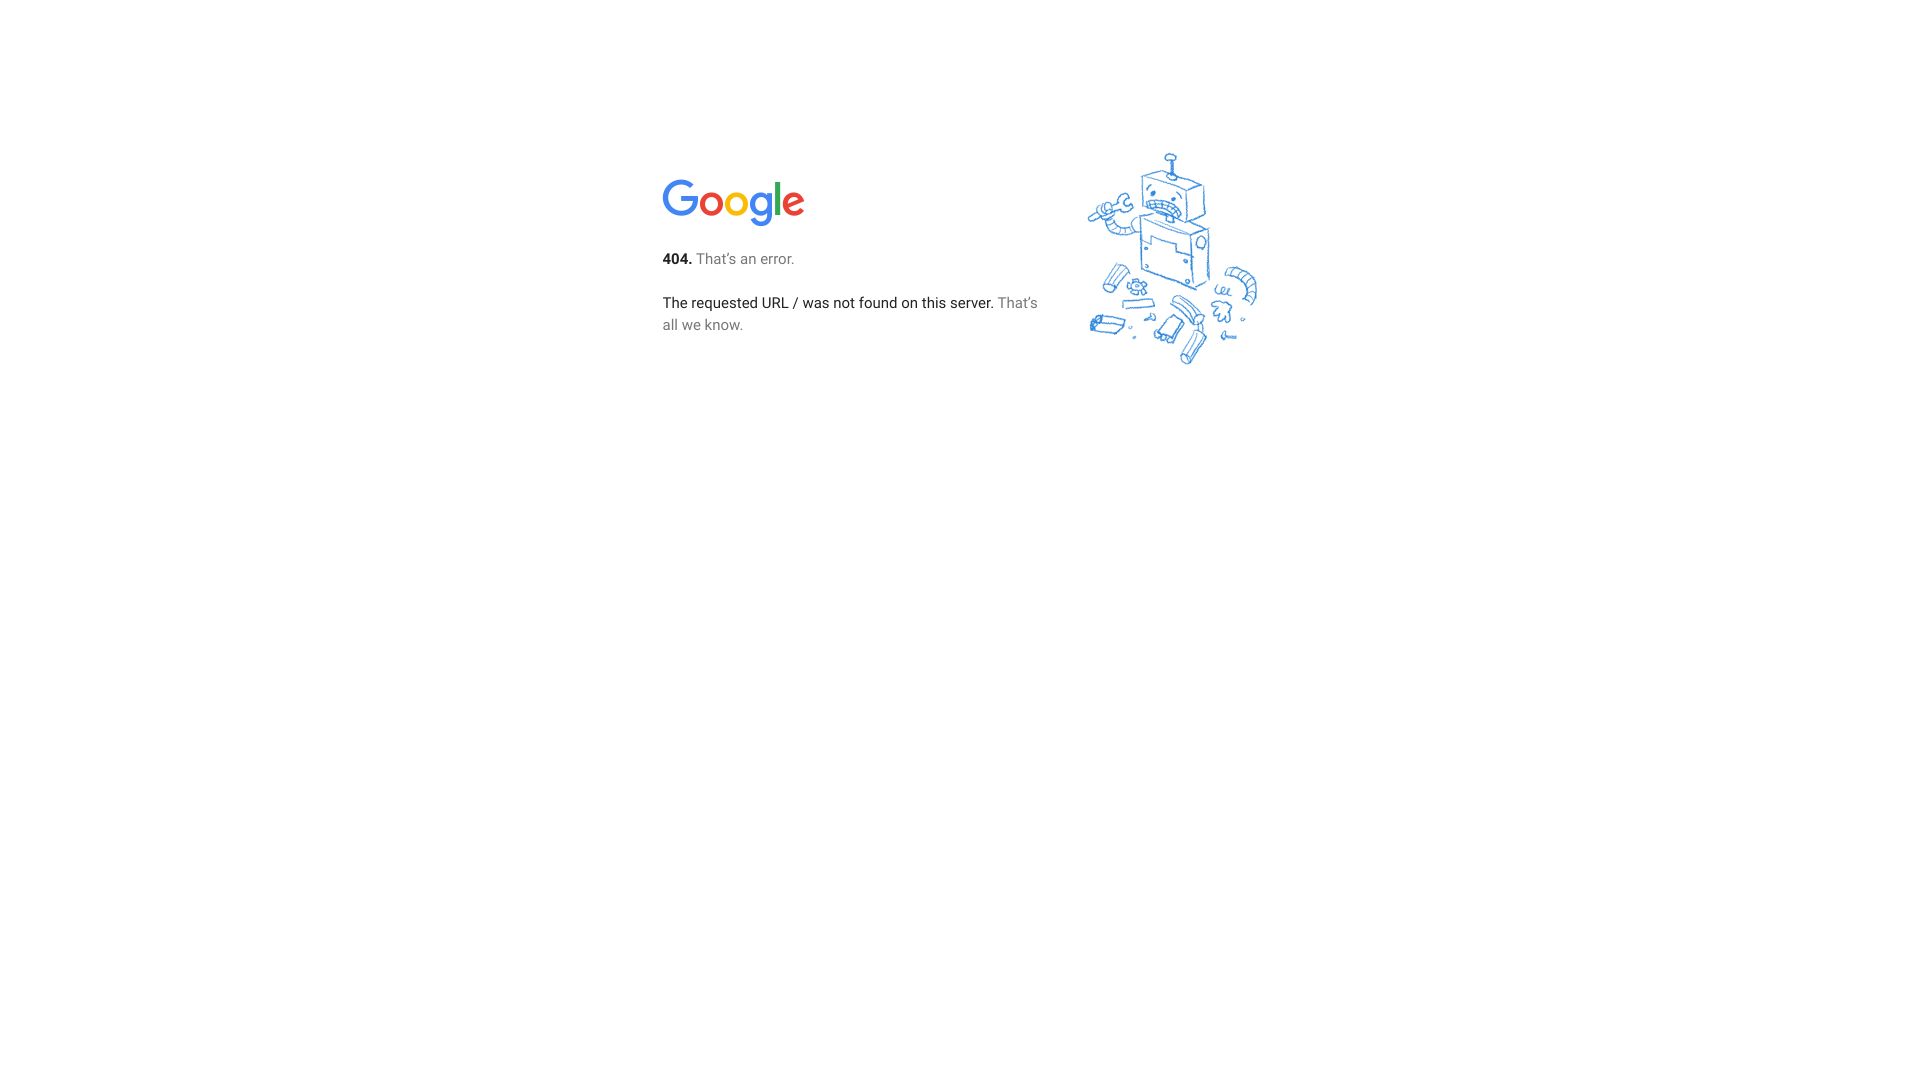 toolbarqueries.google.by